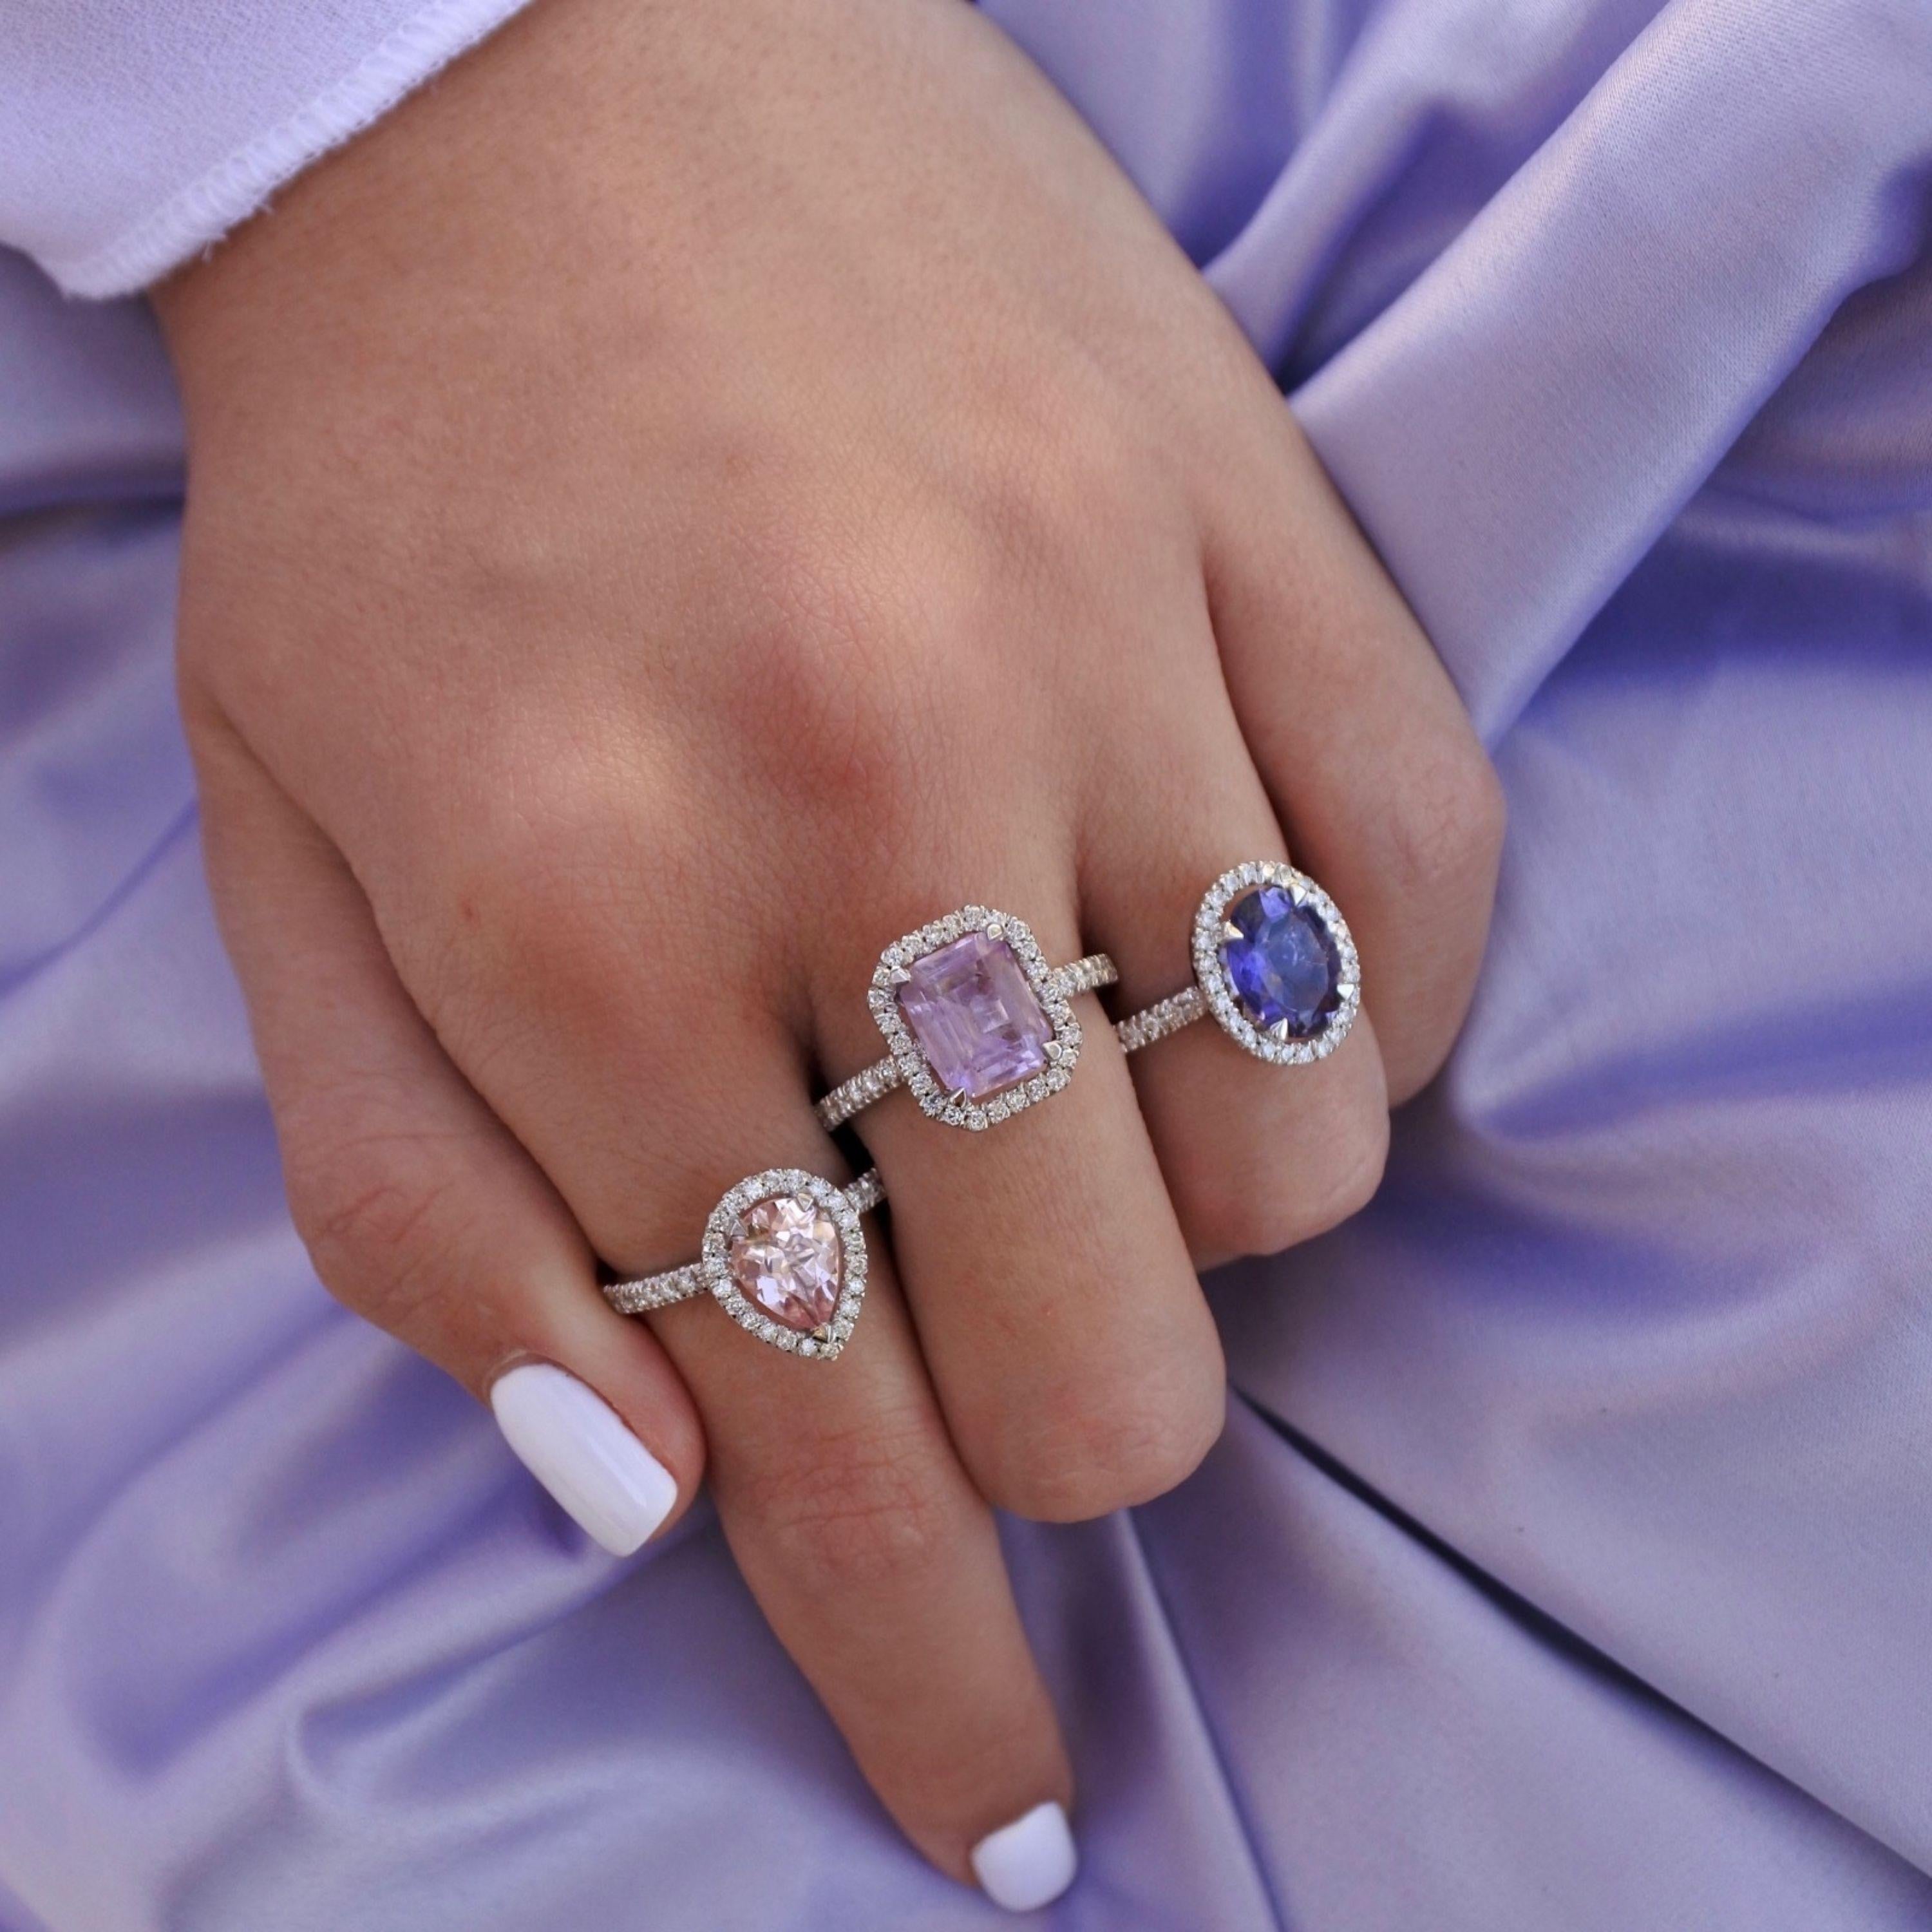 Modern 1.56 Carat Oval Tanzanite and Diamonds Halo Ring in White Gold - Shlomit Rogel For Sale